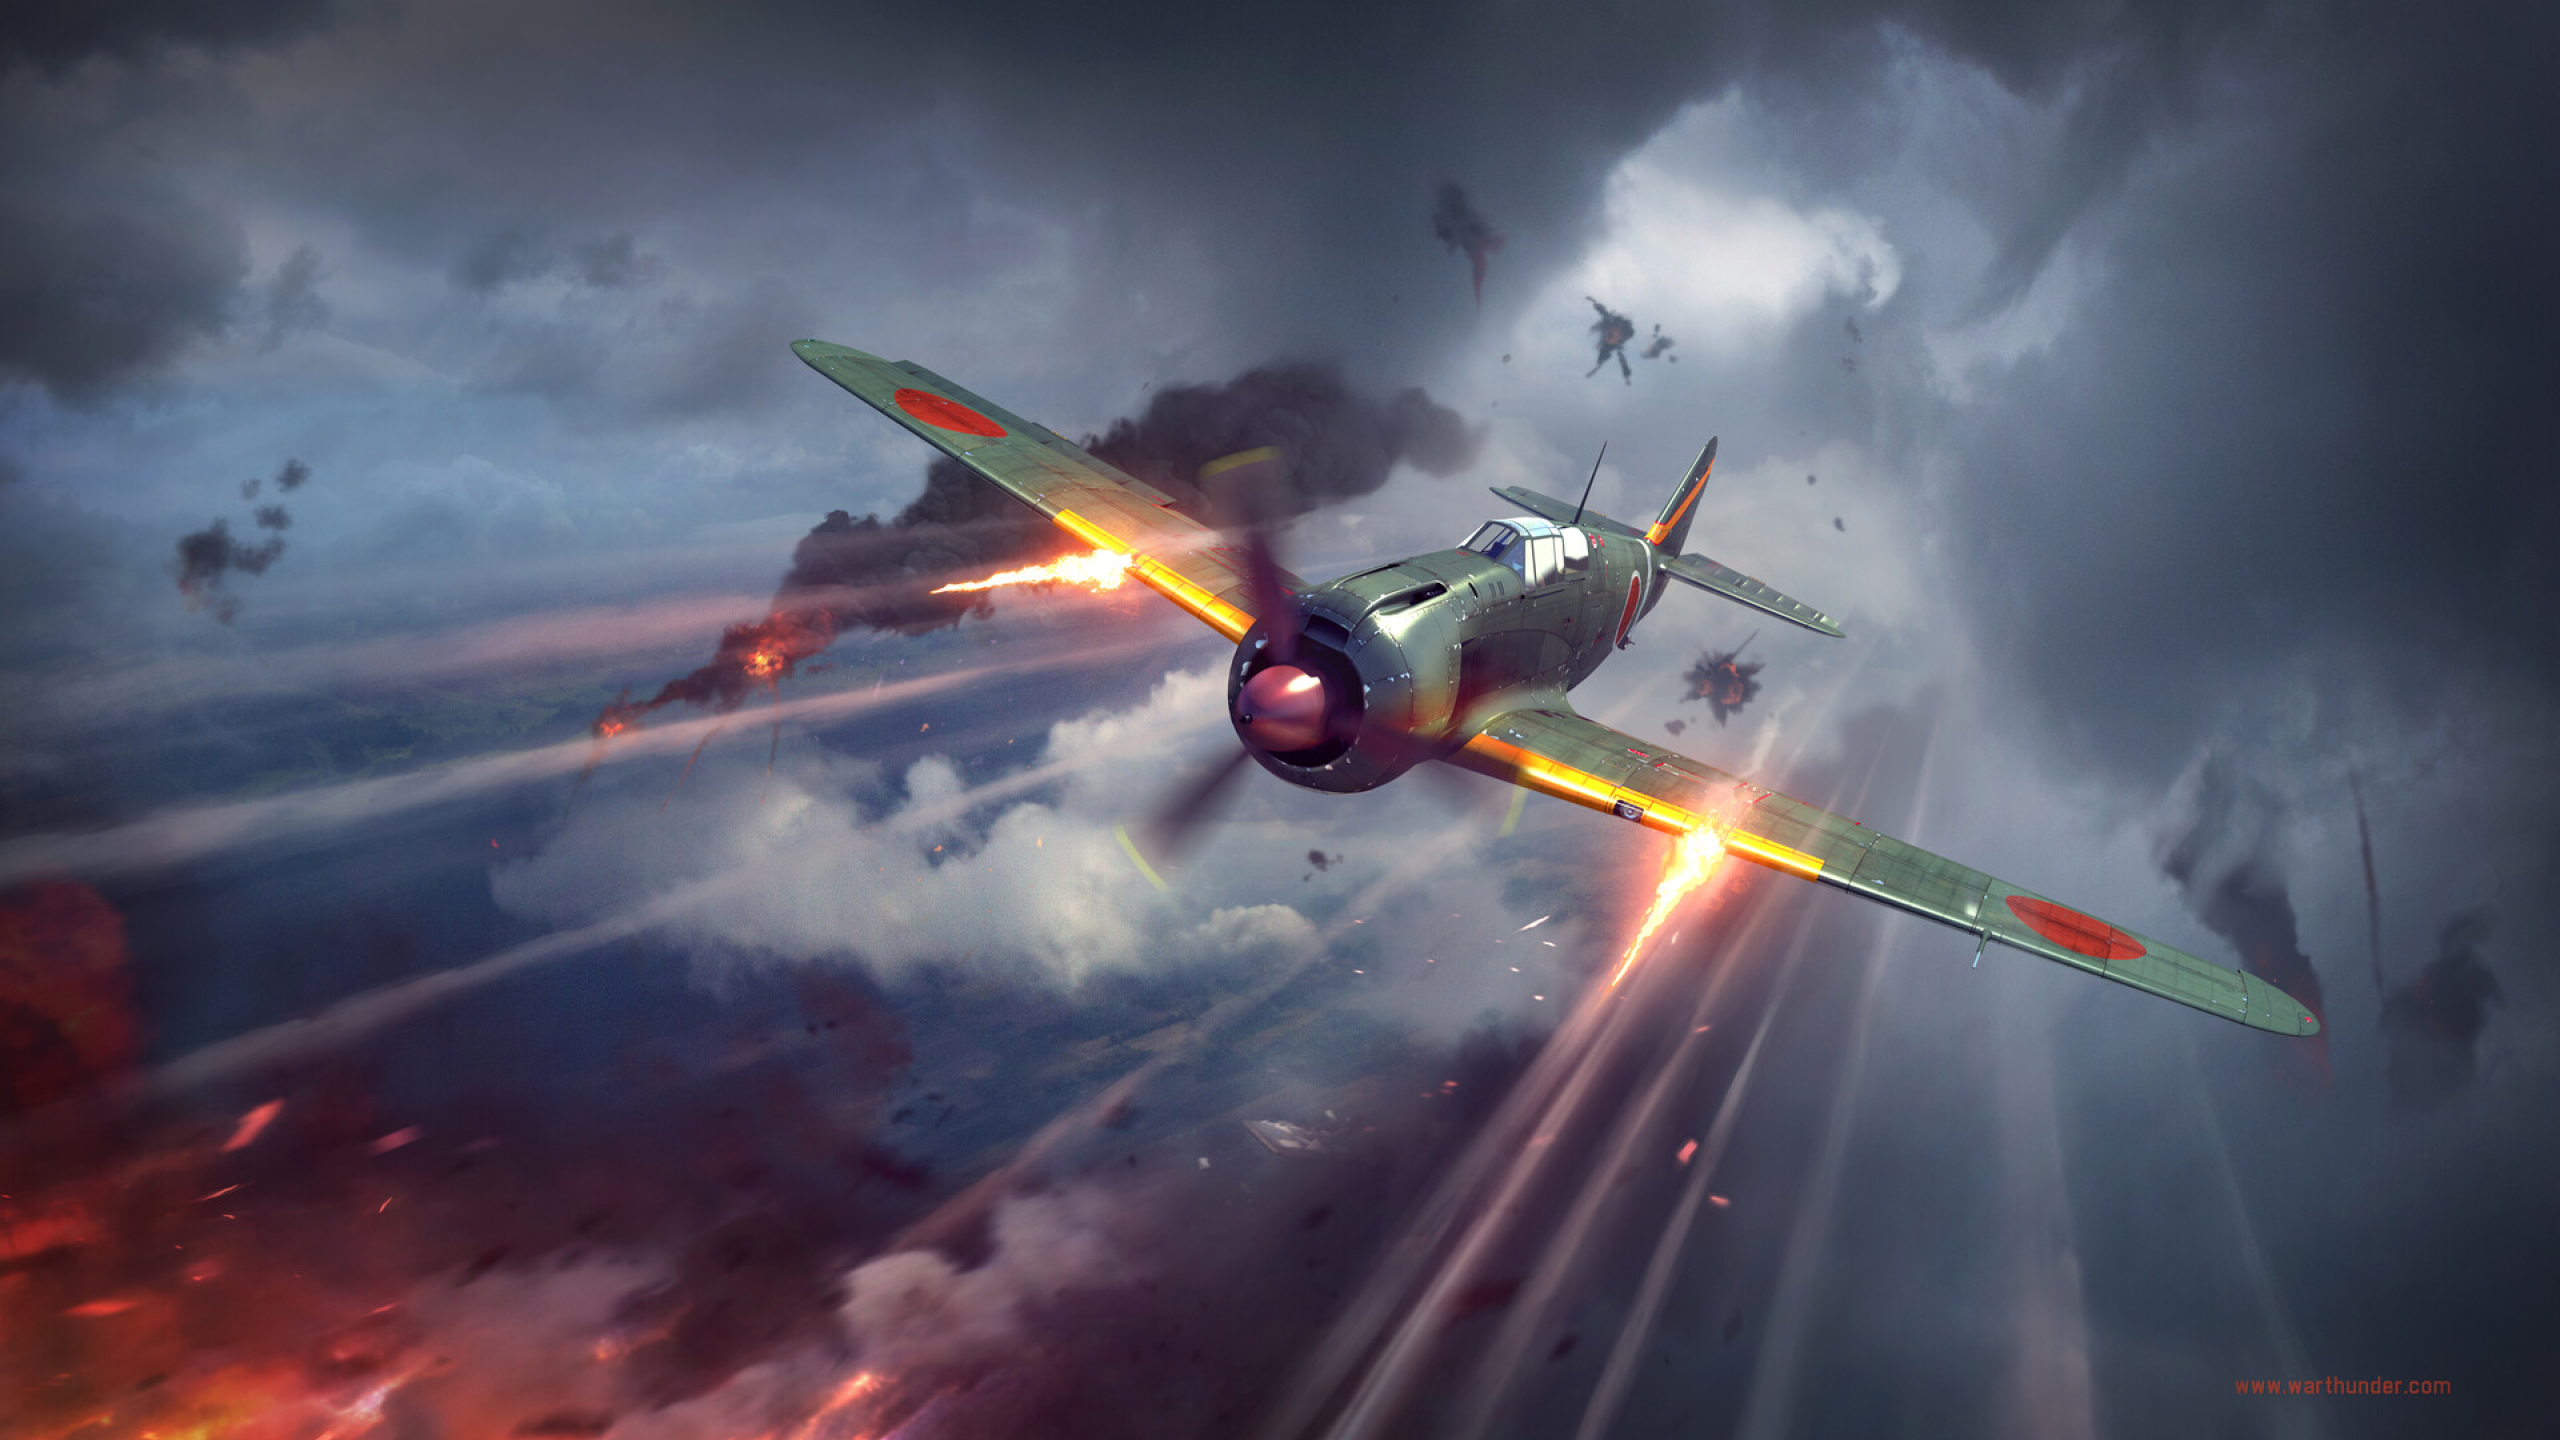 2560x1440 Warplane War Thunder 1440p Resolution Wallpaper Hd Games 4k Wallpapers Images Photos And Background Wallpapers Den